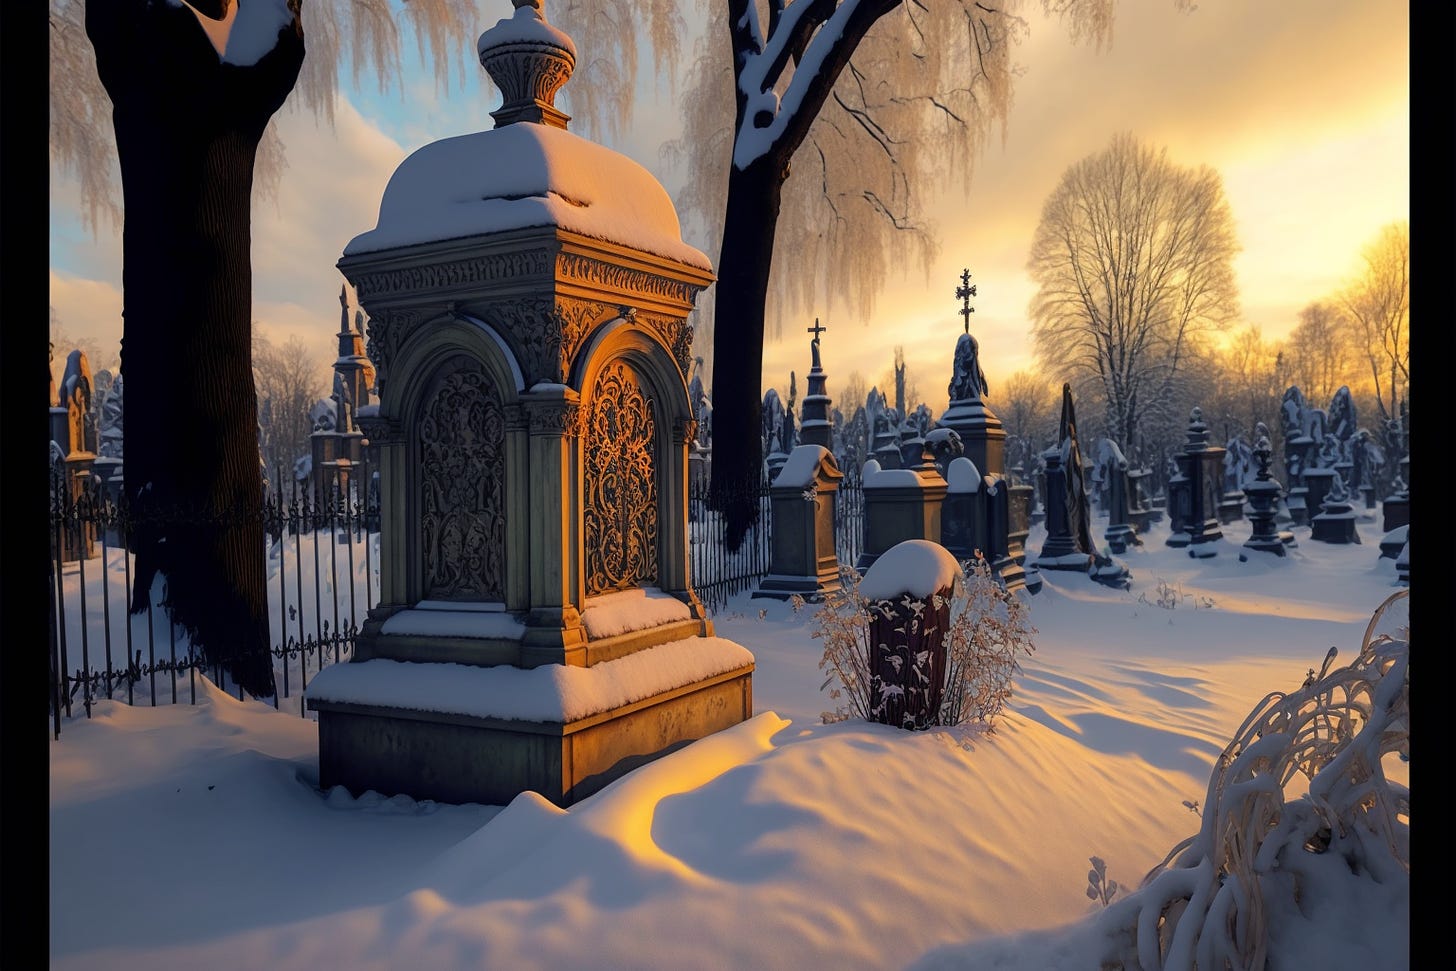 art nouveau cemetery at the golden hour, all covered in snow